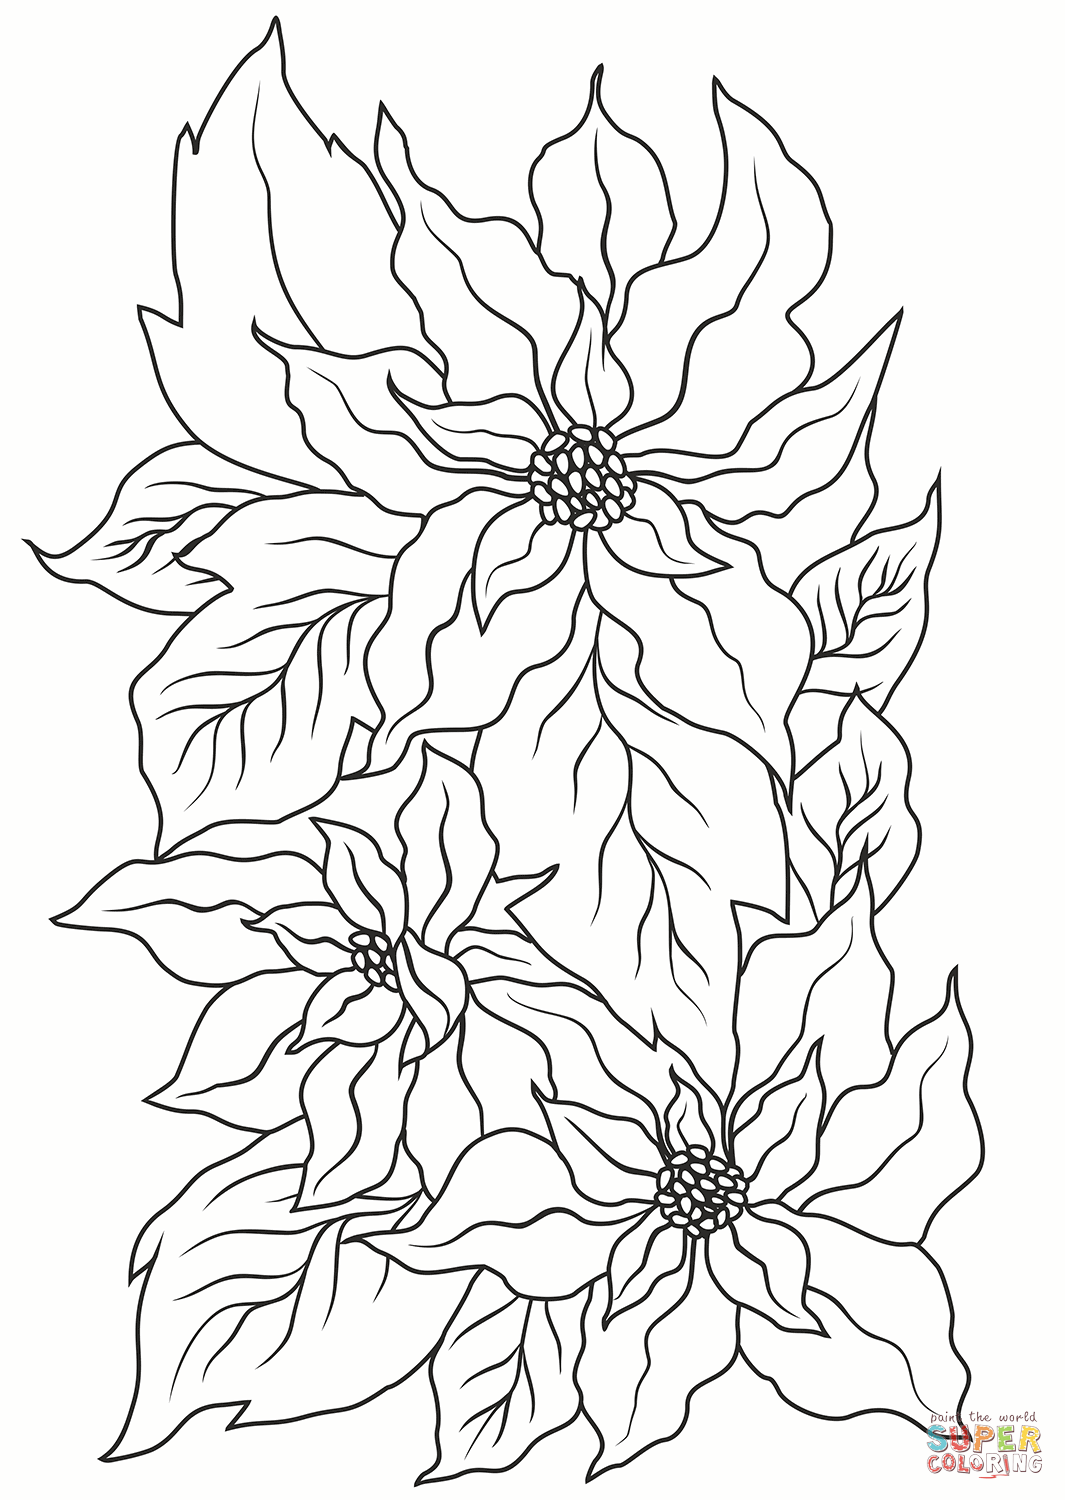 Pink Poinsettia Coloring Page